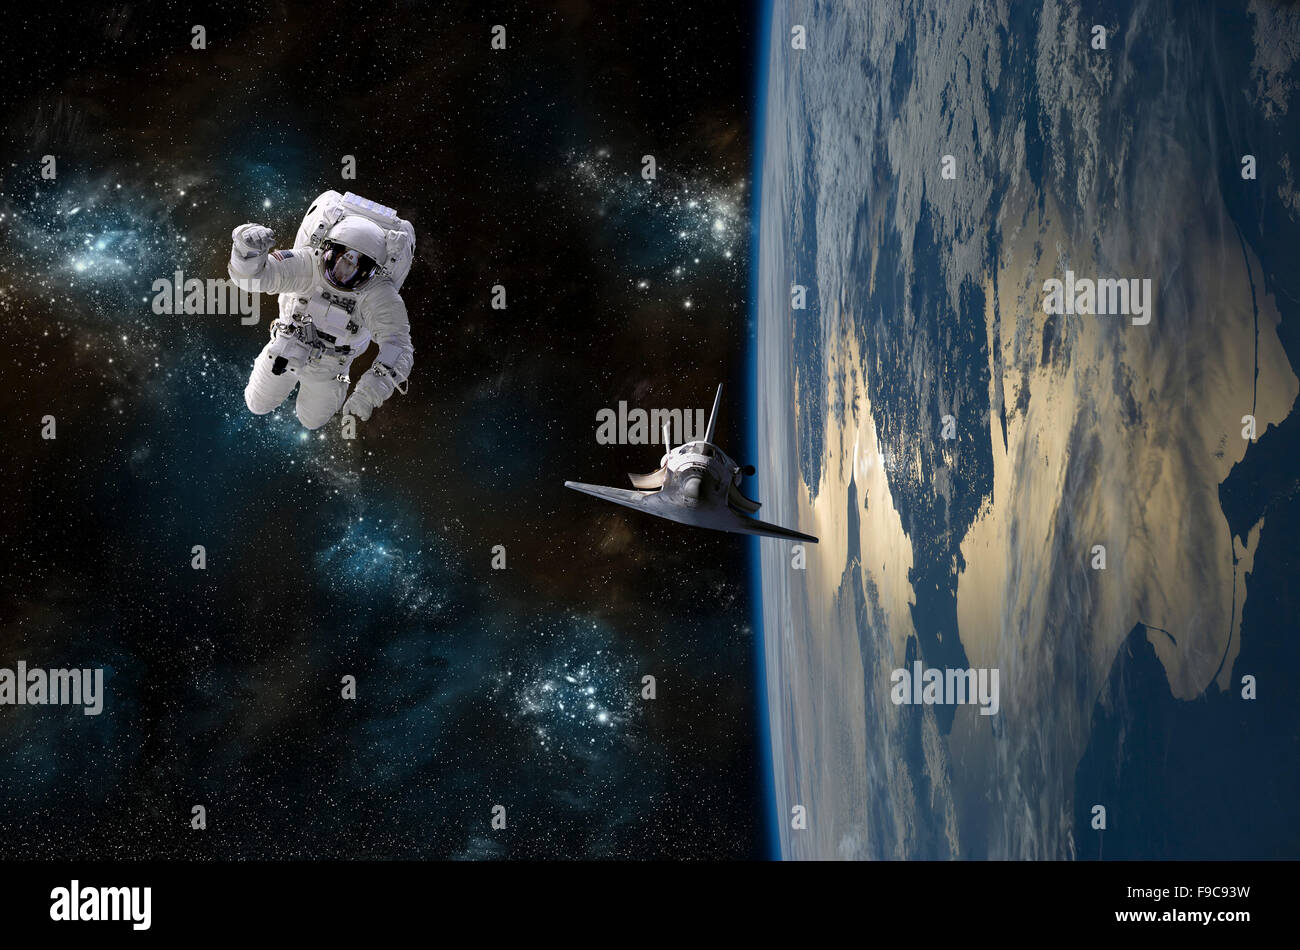 An astronaut drifting in space is rescued by a space shuttle orbiting Earth. Stock Photo